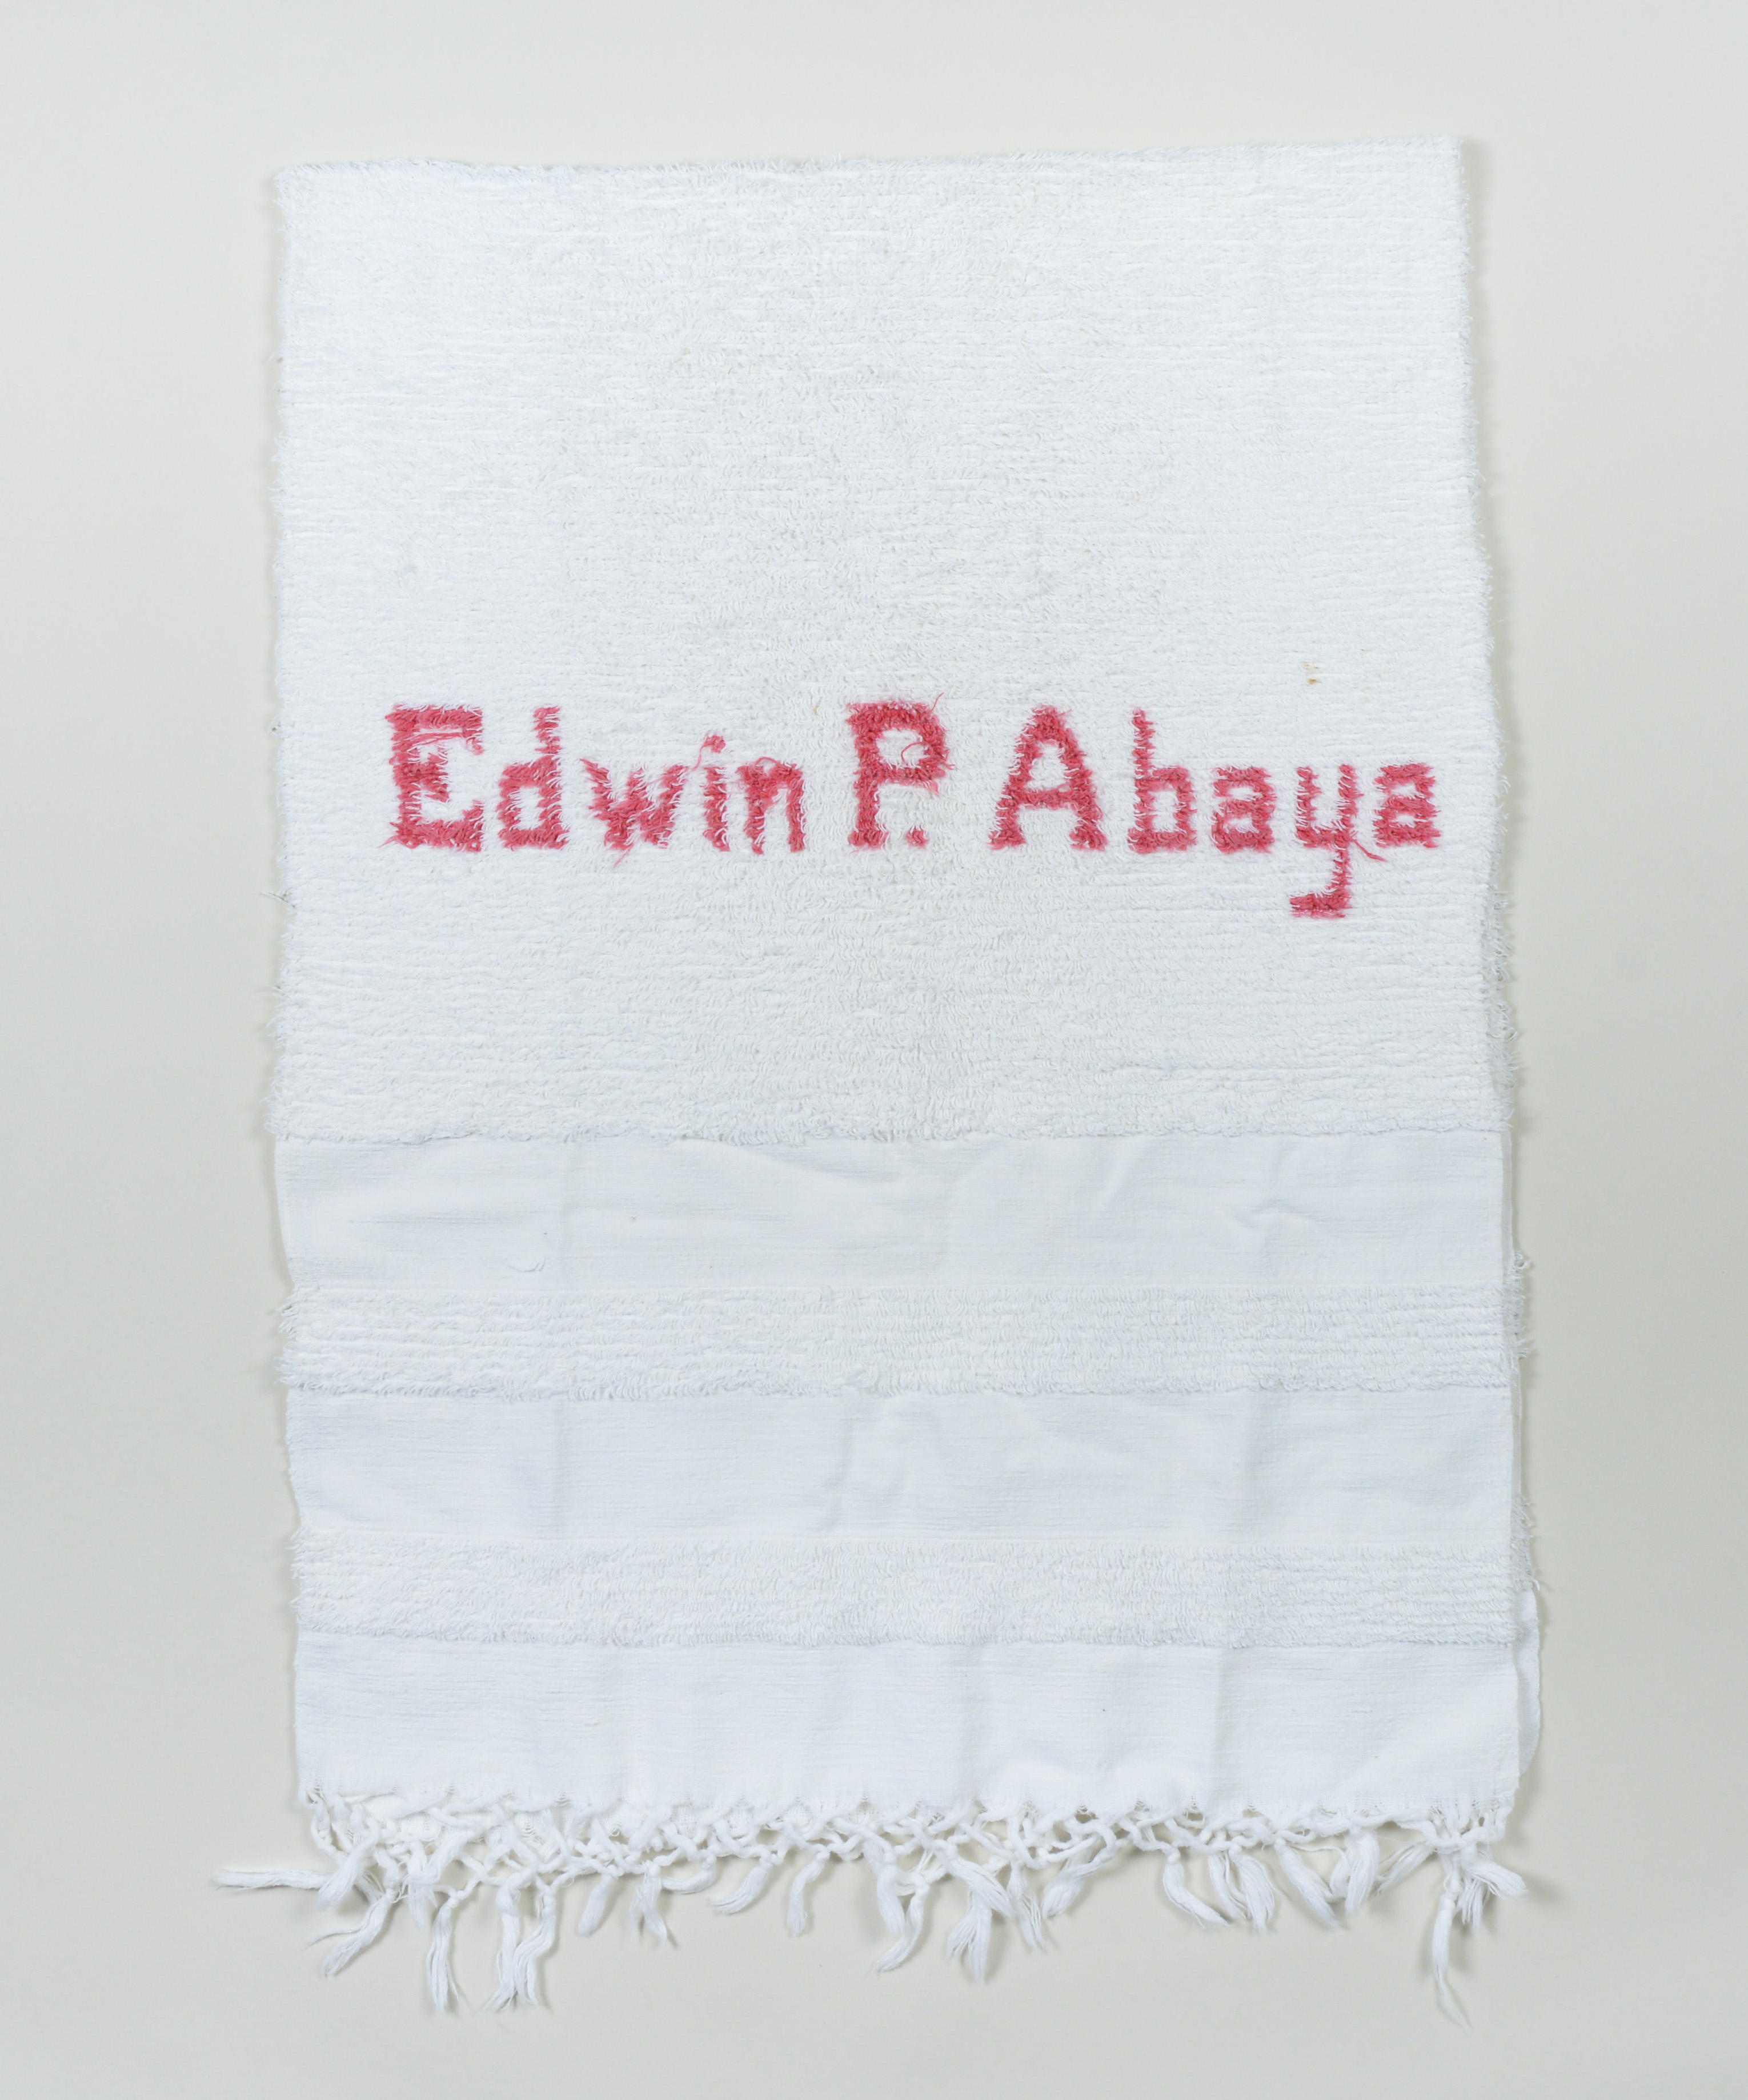 Abel Iloko (Hand woven) bath robe owned by Edwin P. Abaya.Made in the early to mid 1960s; given to Edwin by his mother in the mid 1960s. He left the Philippines in 1968 and brought this towel with him because his mother had passed away by then and it is a keepsake from her. It was the only monogrammed object he had, and he likesthat it looks like such quality work and they “didn’t misspell my name.” Vigan, Ilocos Sur, was known for hand weaving; they make clothing, towels, pashminas, etc. still today. Any views, findings, conclusions, or recommendations expressed in this story do not necessarily represent those of the National Endowment for the Humanities. (c) Field Museum of Natural History - CC BY-NC 4.0